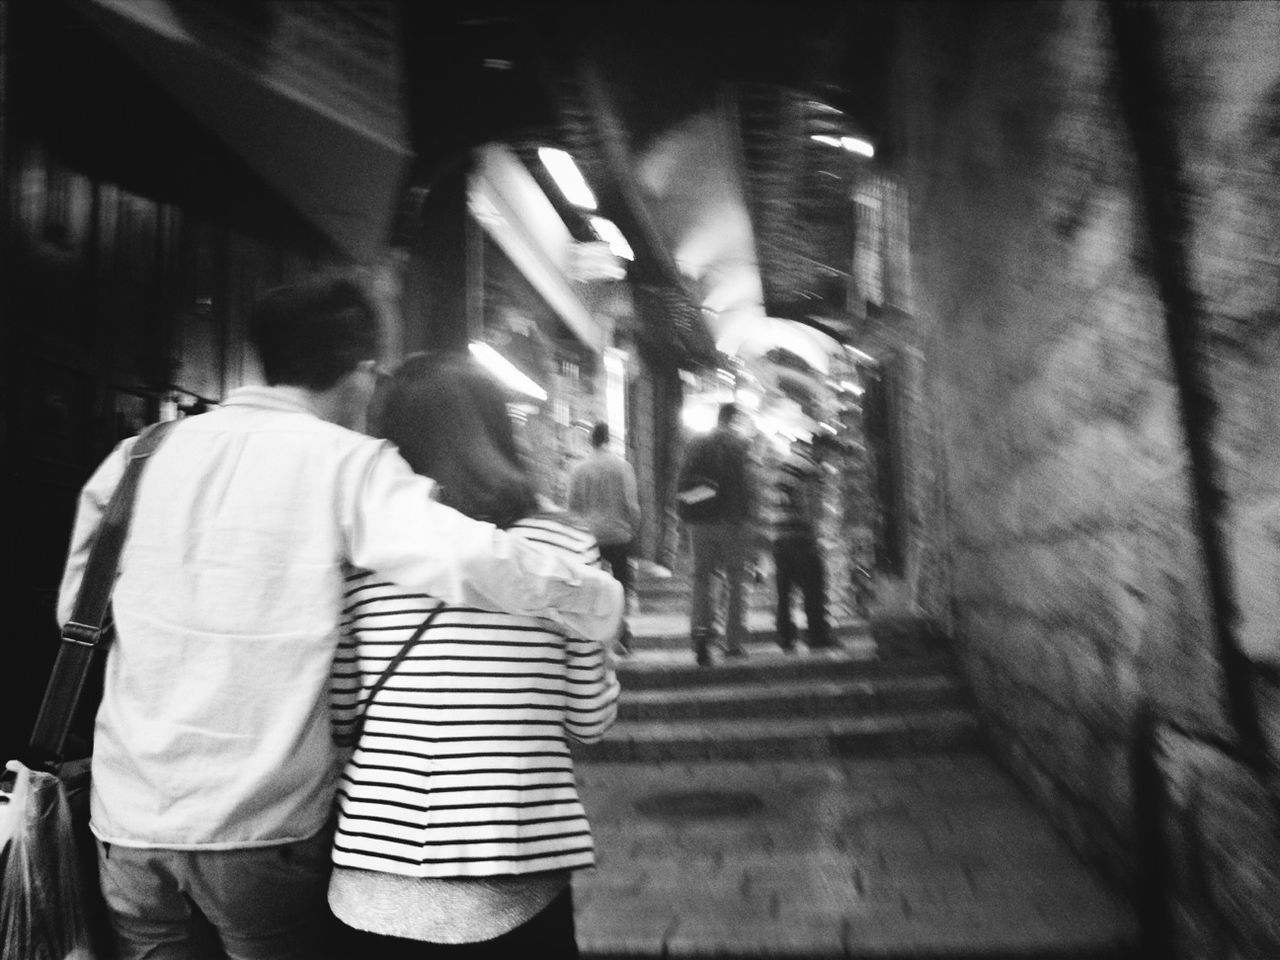 Rear view of couple walking on street at night